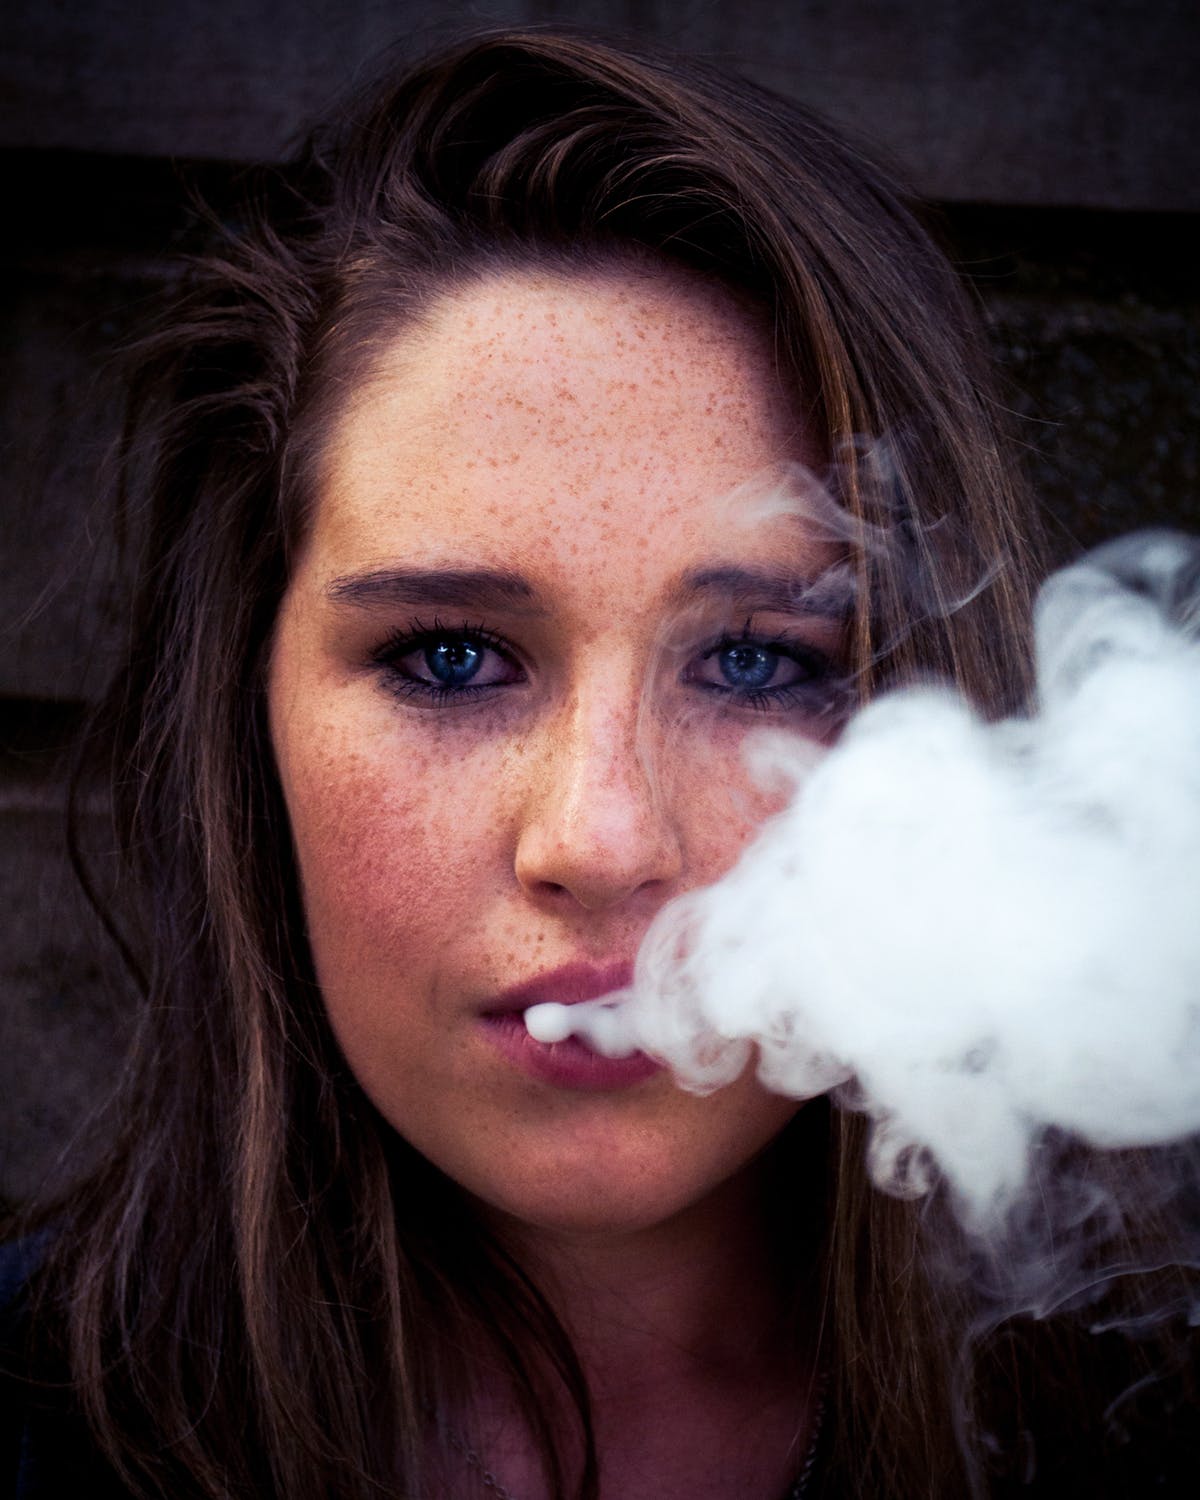 Juuling: The New E-Cigarette Trend That Teens are Hiding